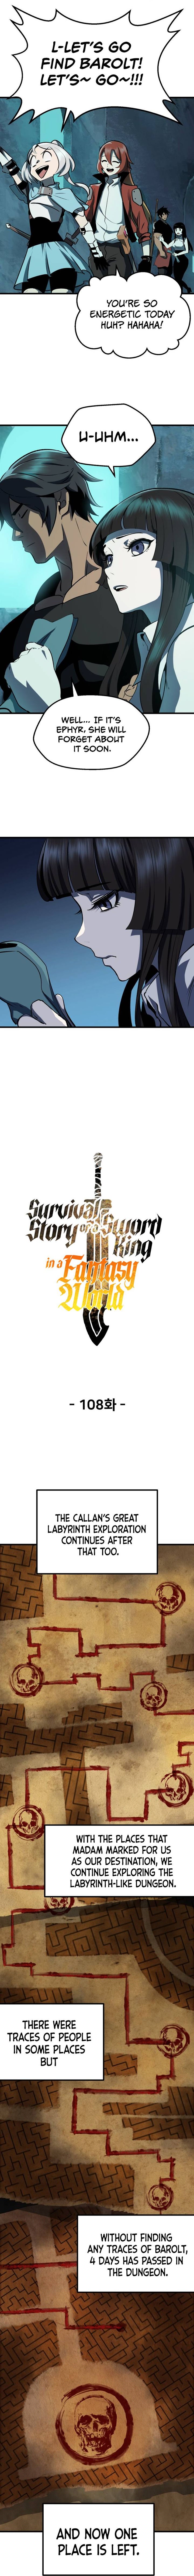 survival_story_of_a_sword_king_in_a_fantasy_world_108_6